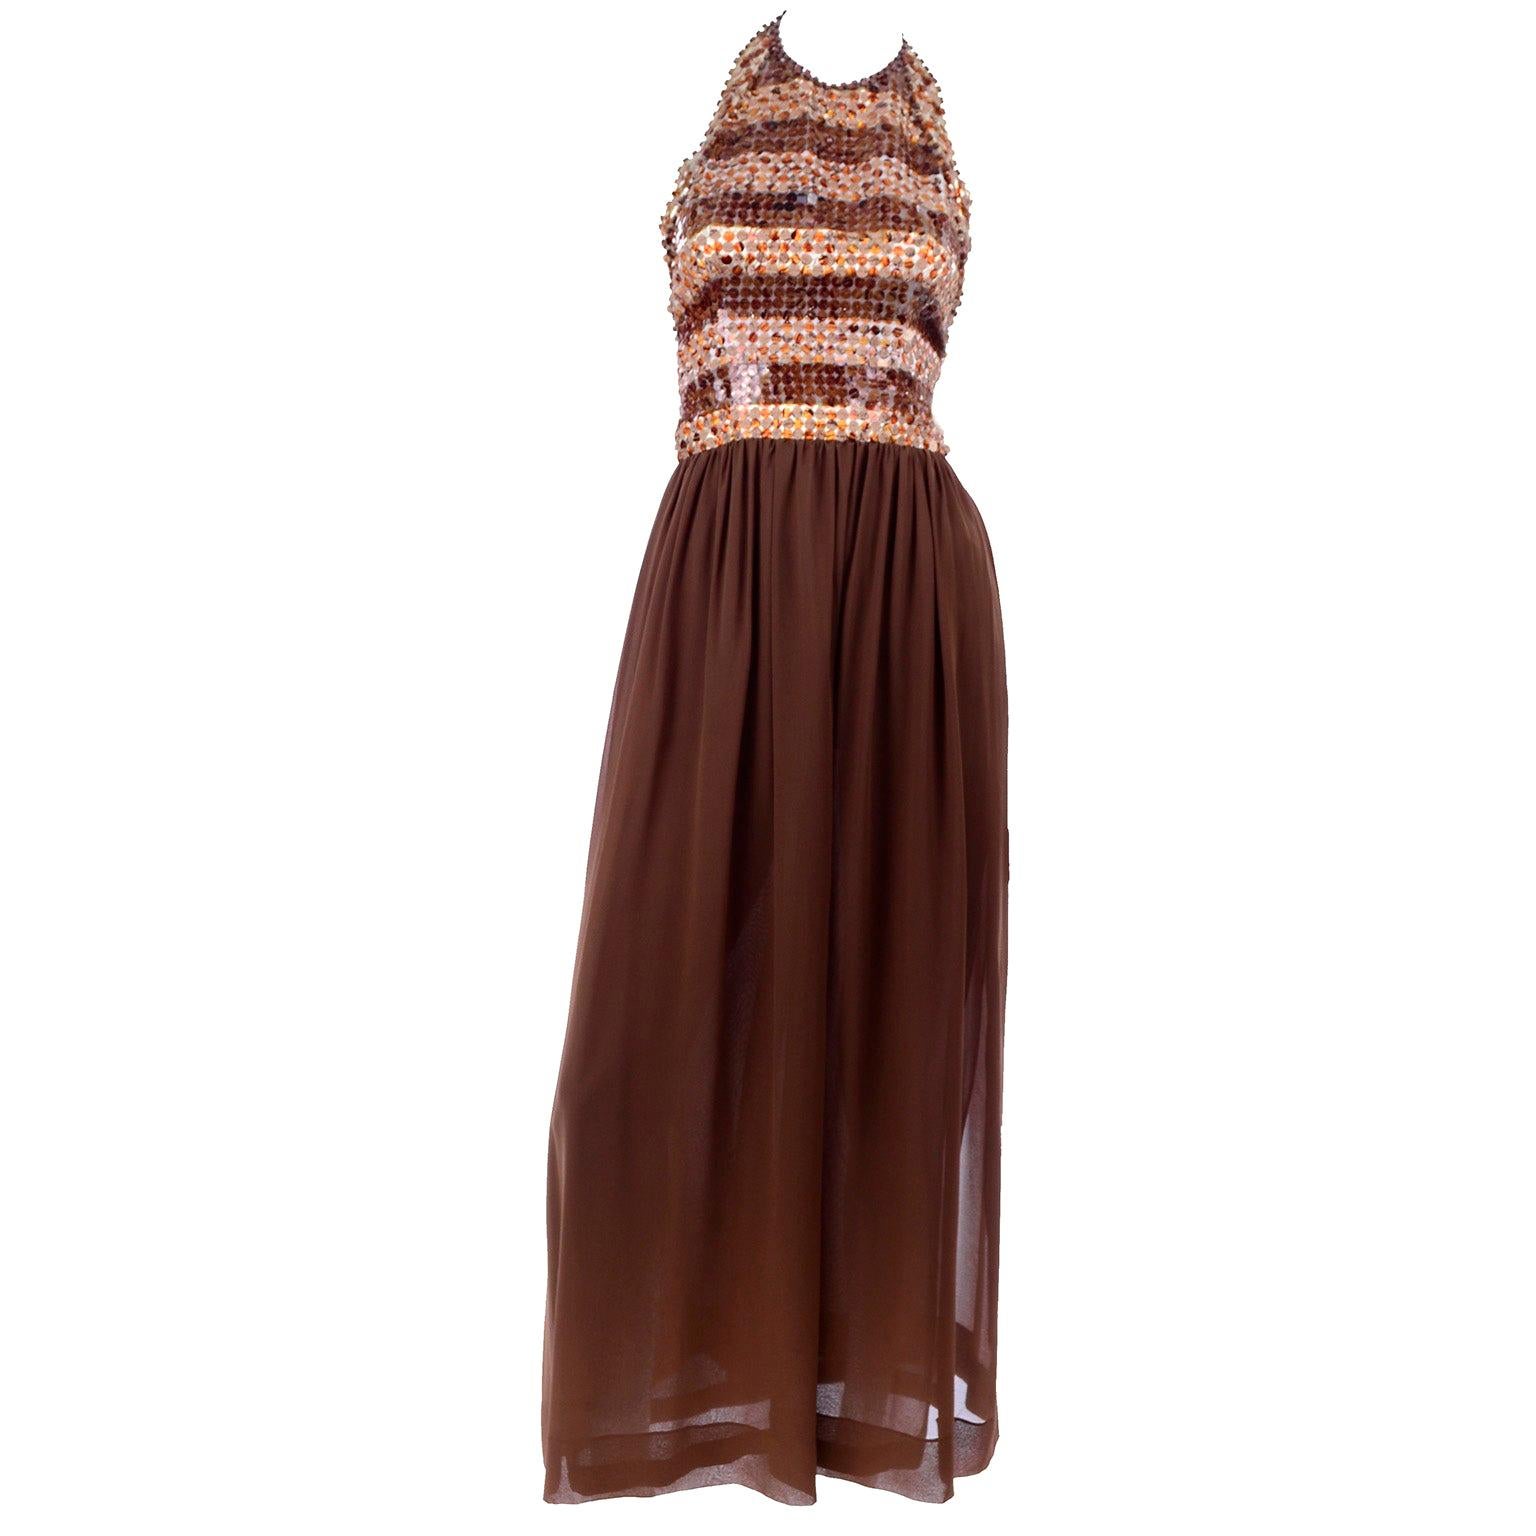 1996 Givenchy Vintage Chocolate Brown Silk Halter Beaded Evening Dress For Sale